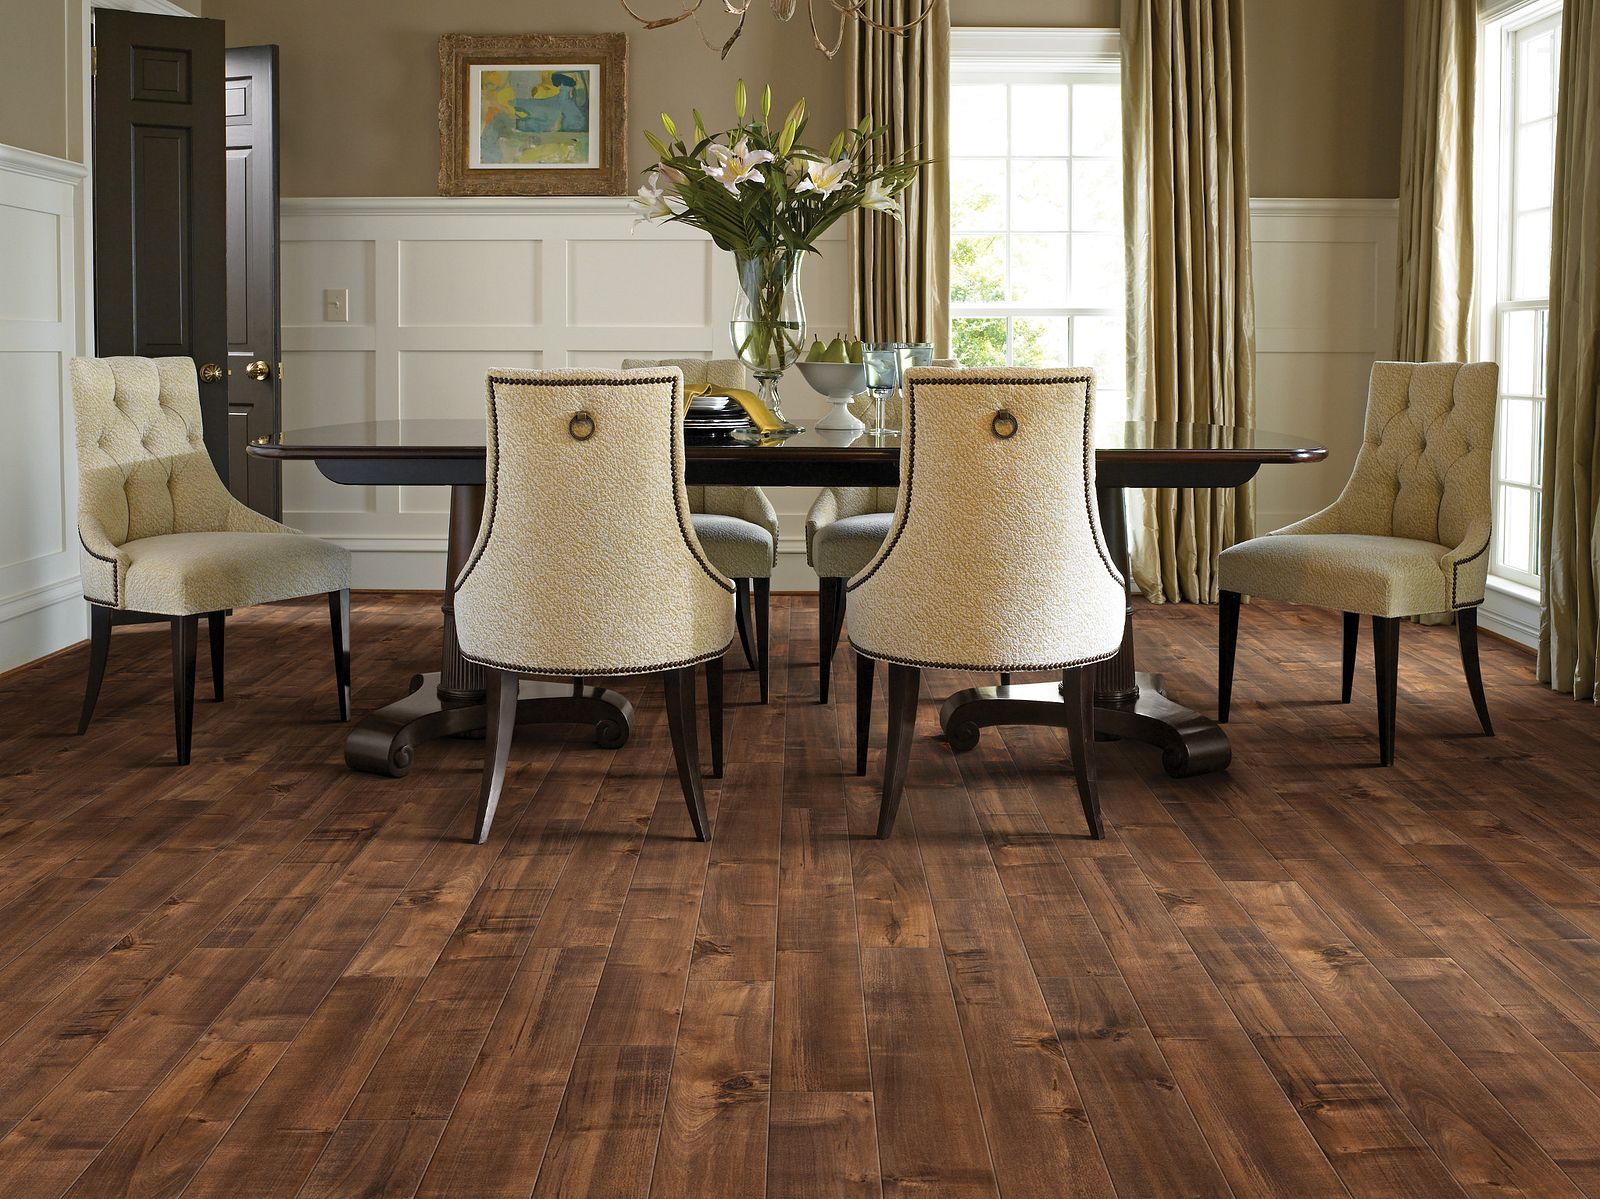 A Wide Range of Laminate Looks